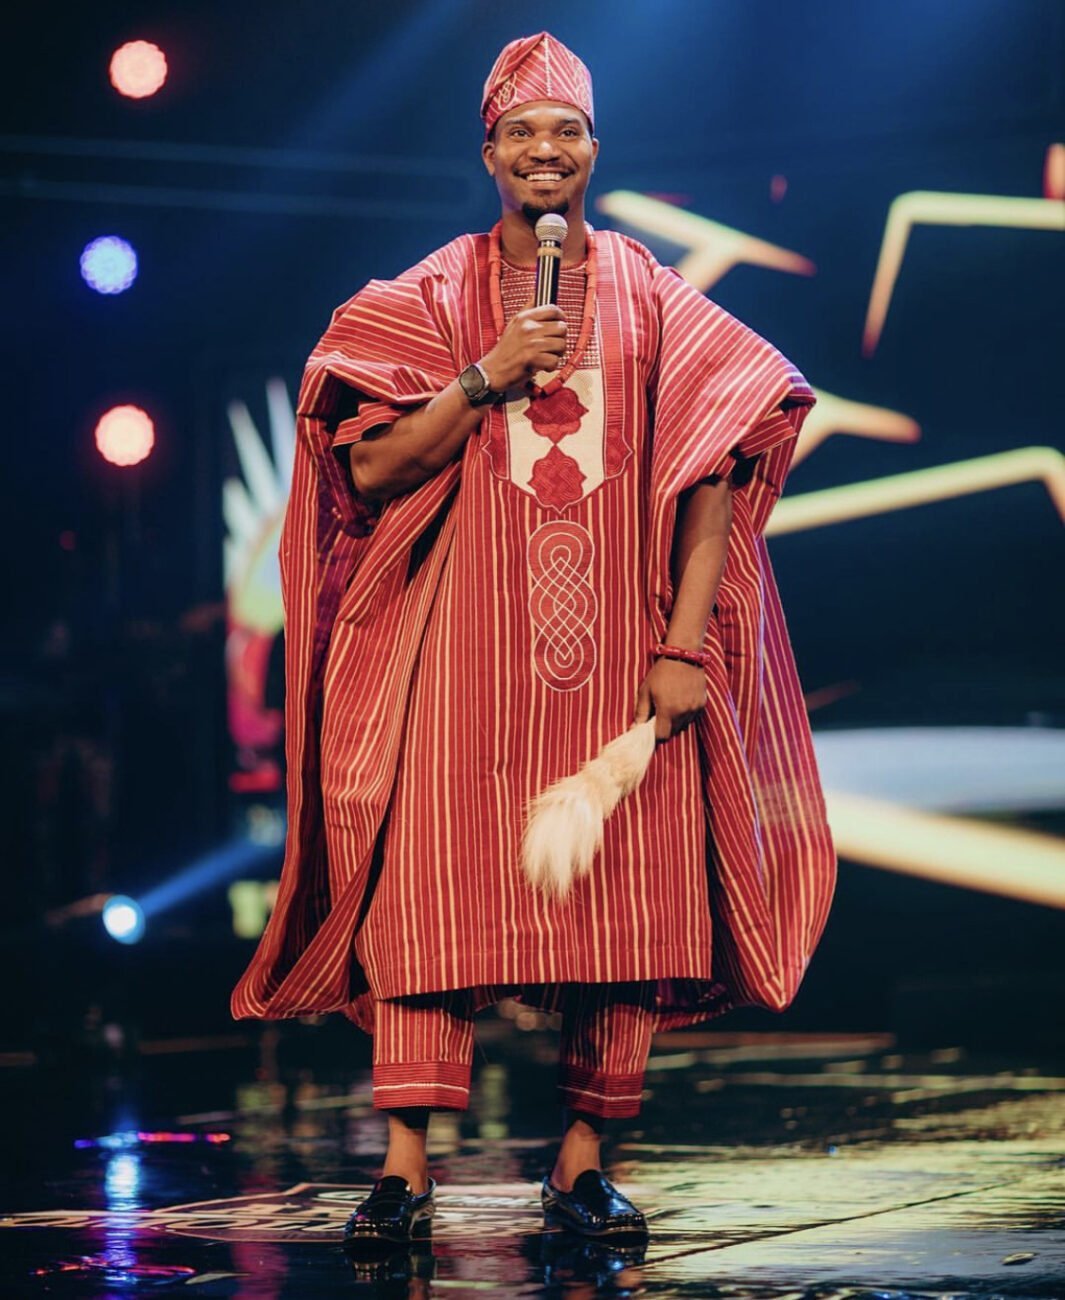 Kunle Remi representing the rich Yoruba culture with an elegant traditional outfit, showcasing cultural appreciation withiut excess.